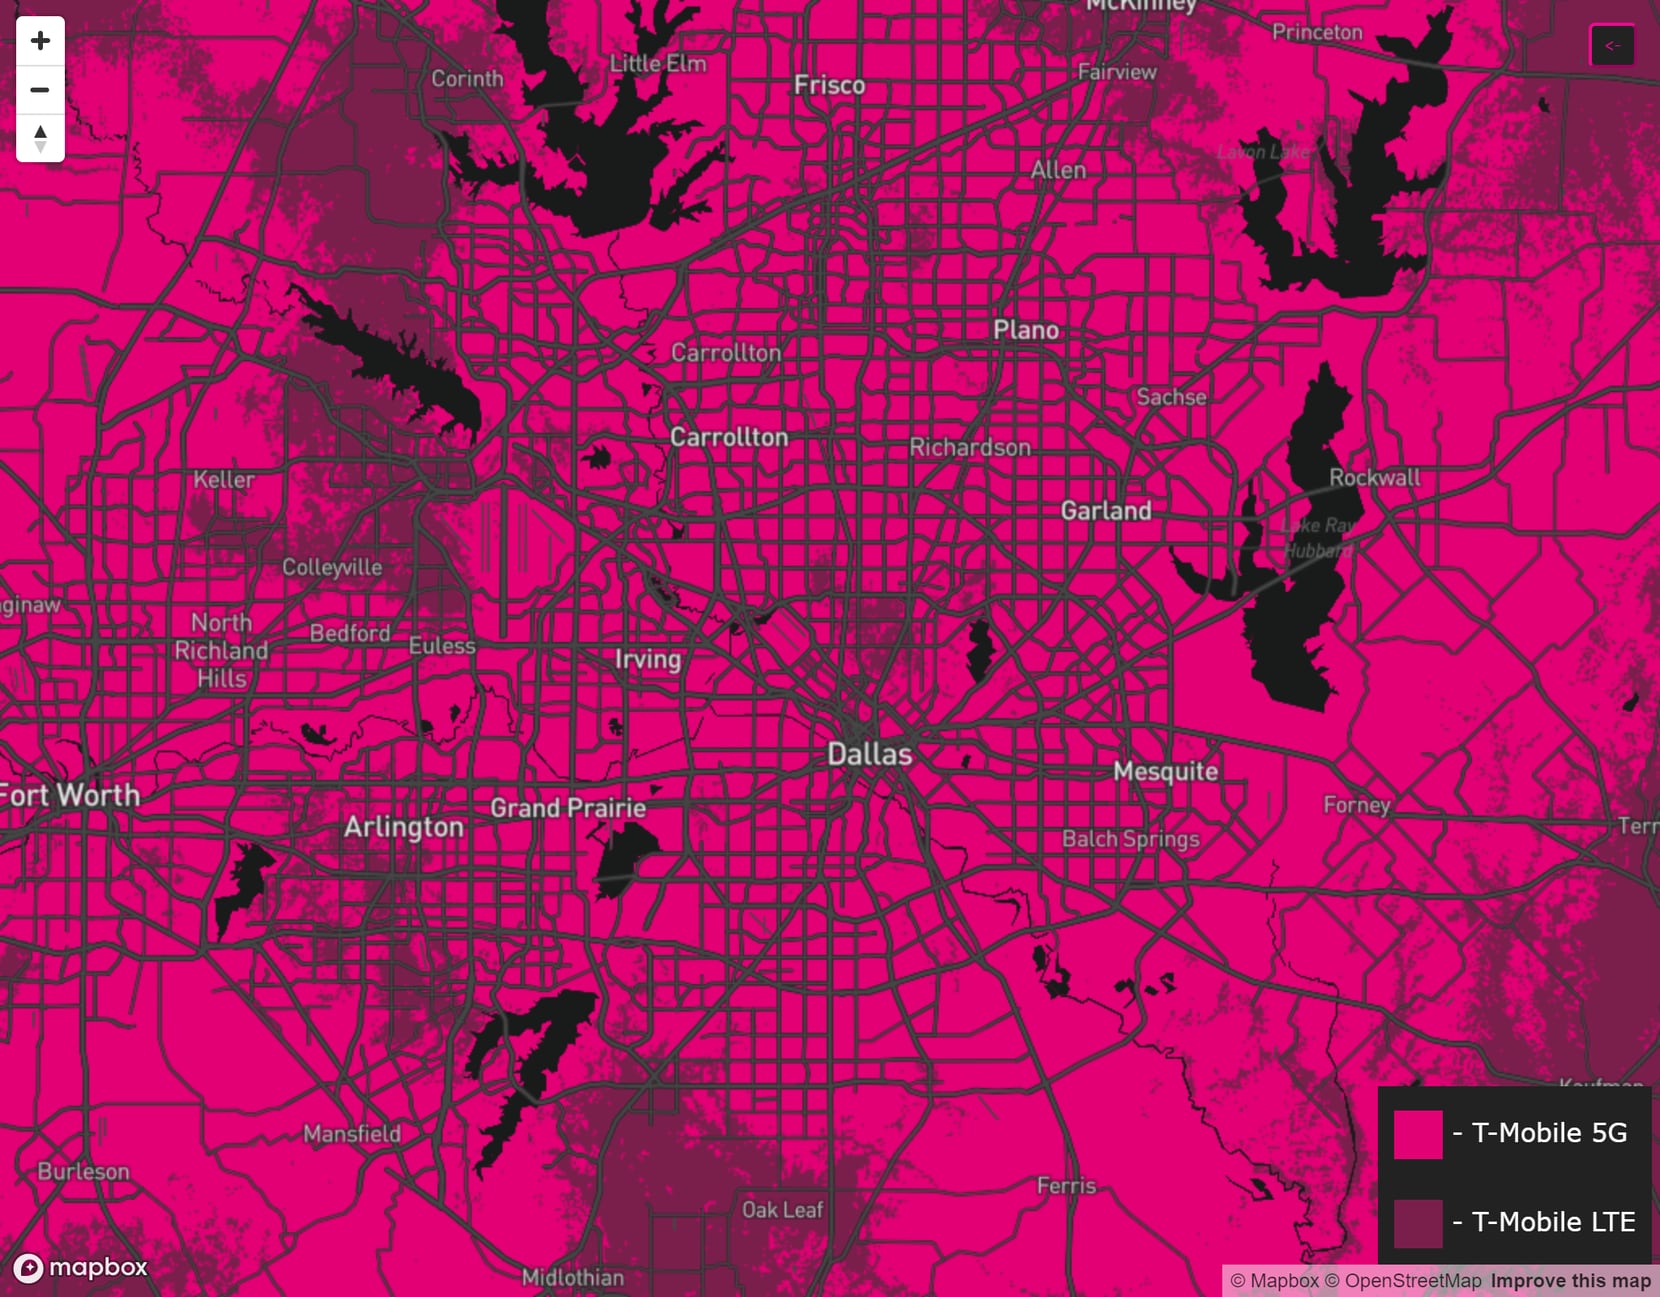 Here’s the map of where T-Mobile will offer wireless 5G service in